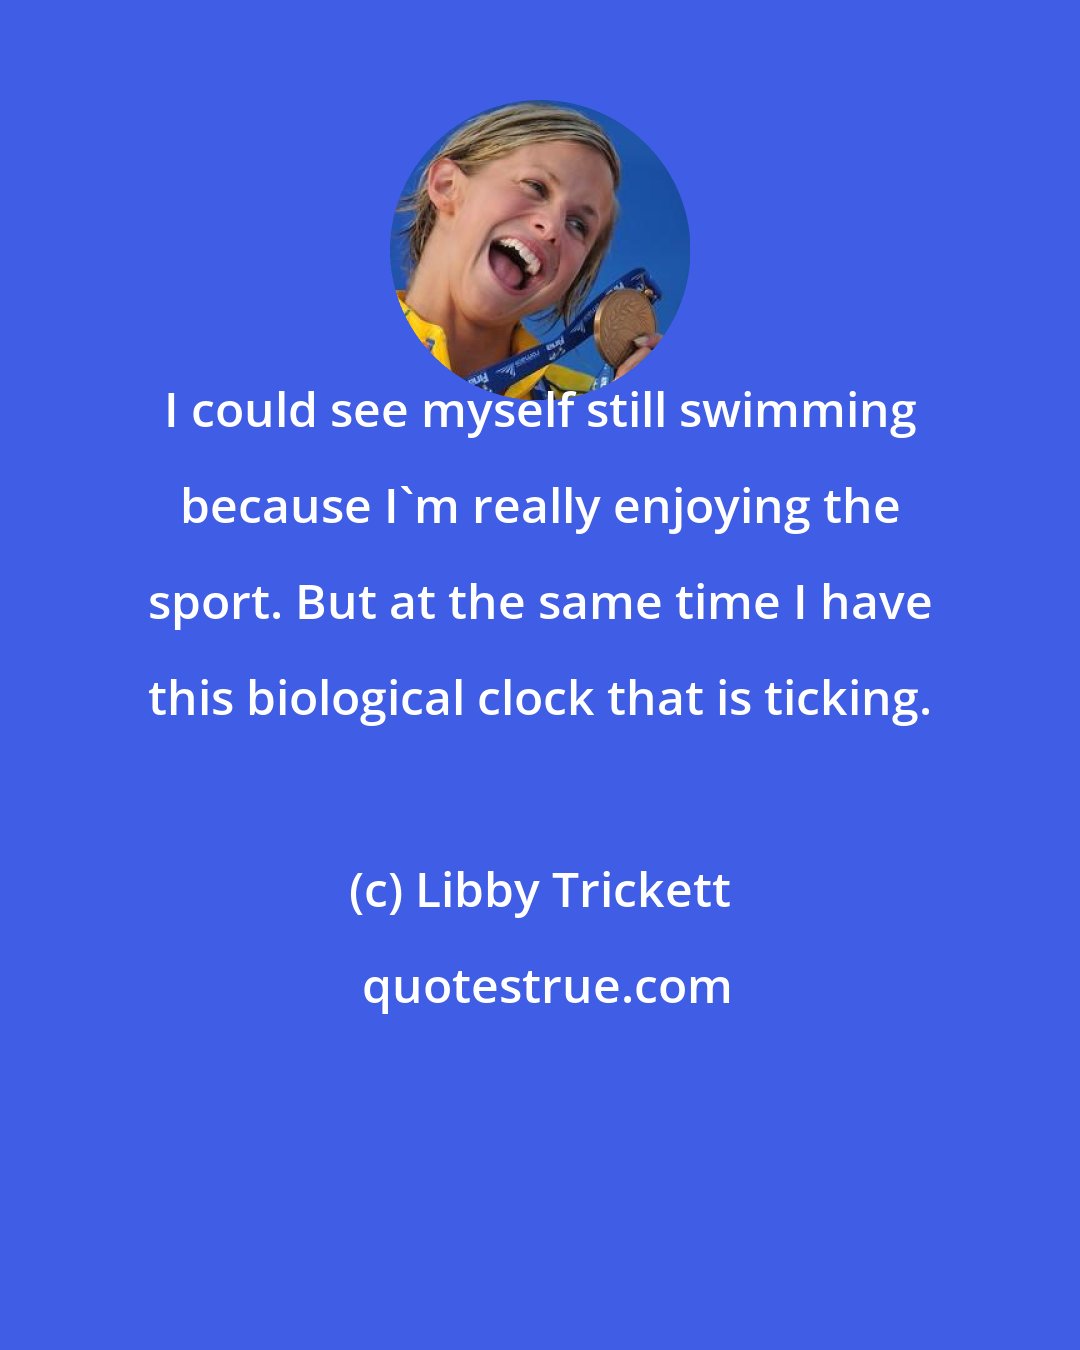 Libby Trickett: I could see myself still swimming because I'm really enjoying the sport. But at the same time I have this biological clock that is ticking.